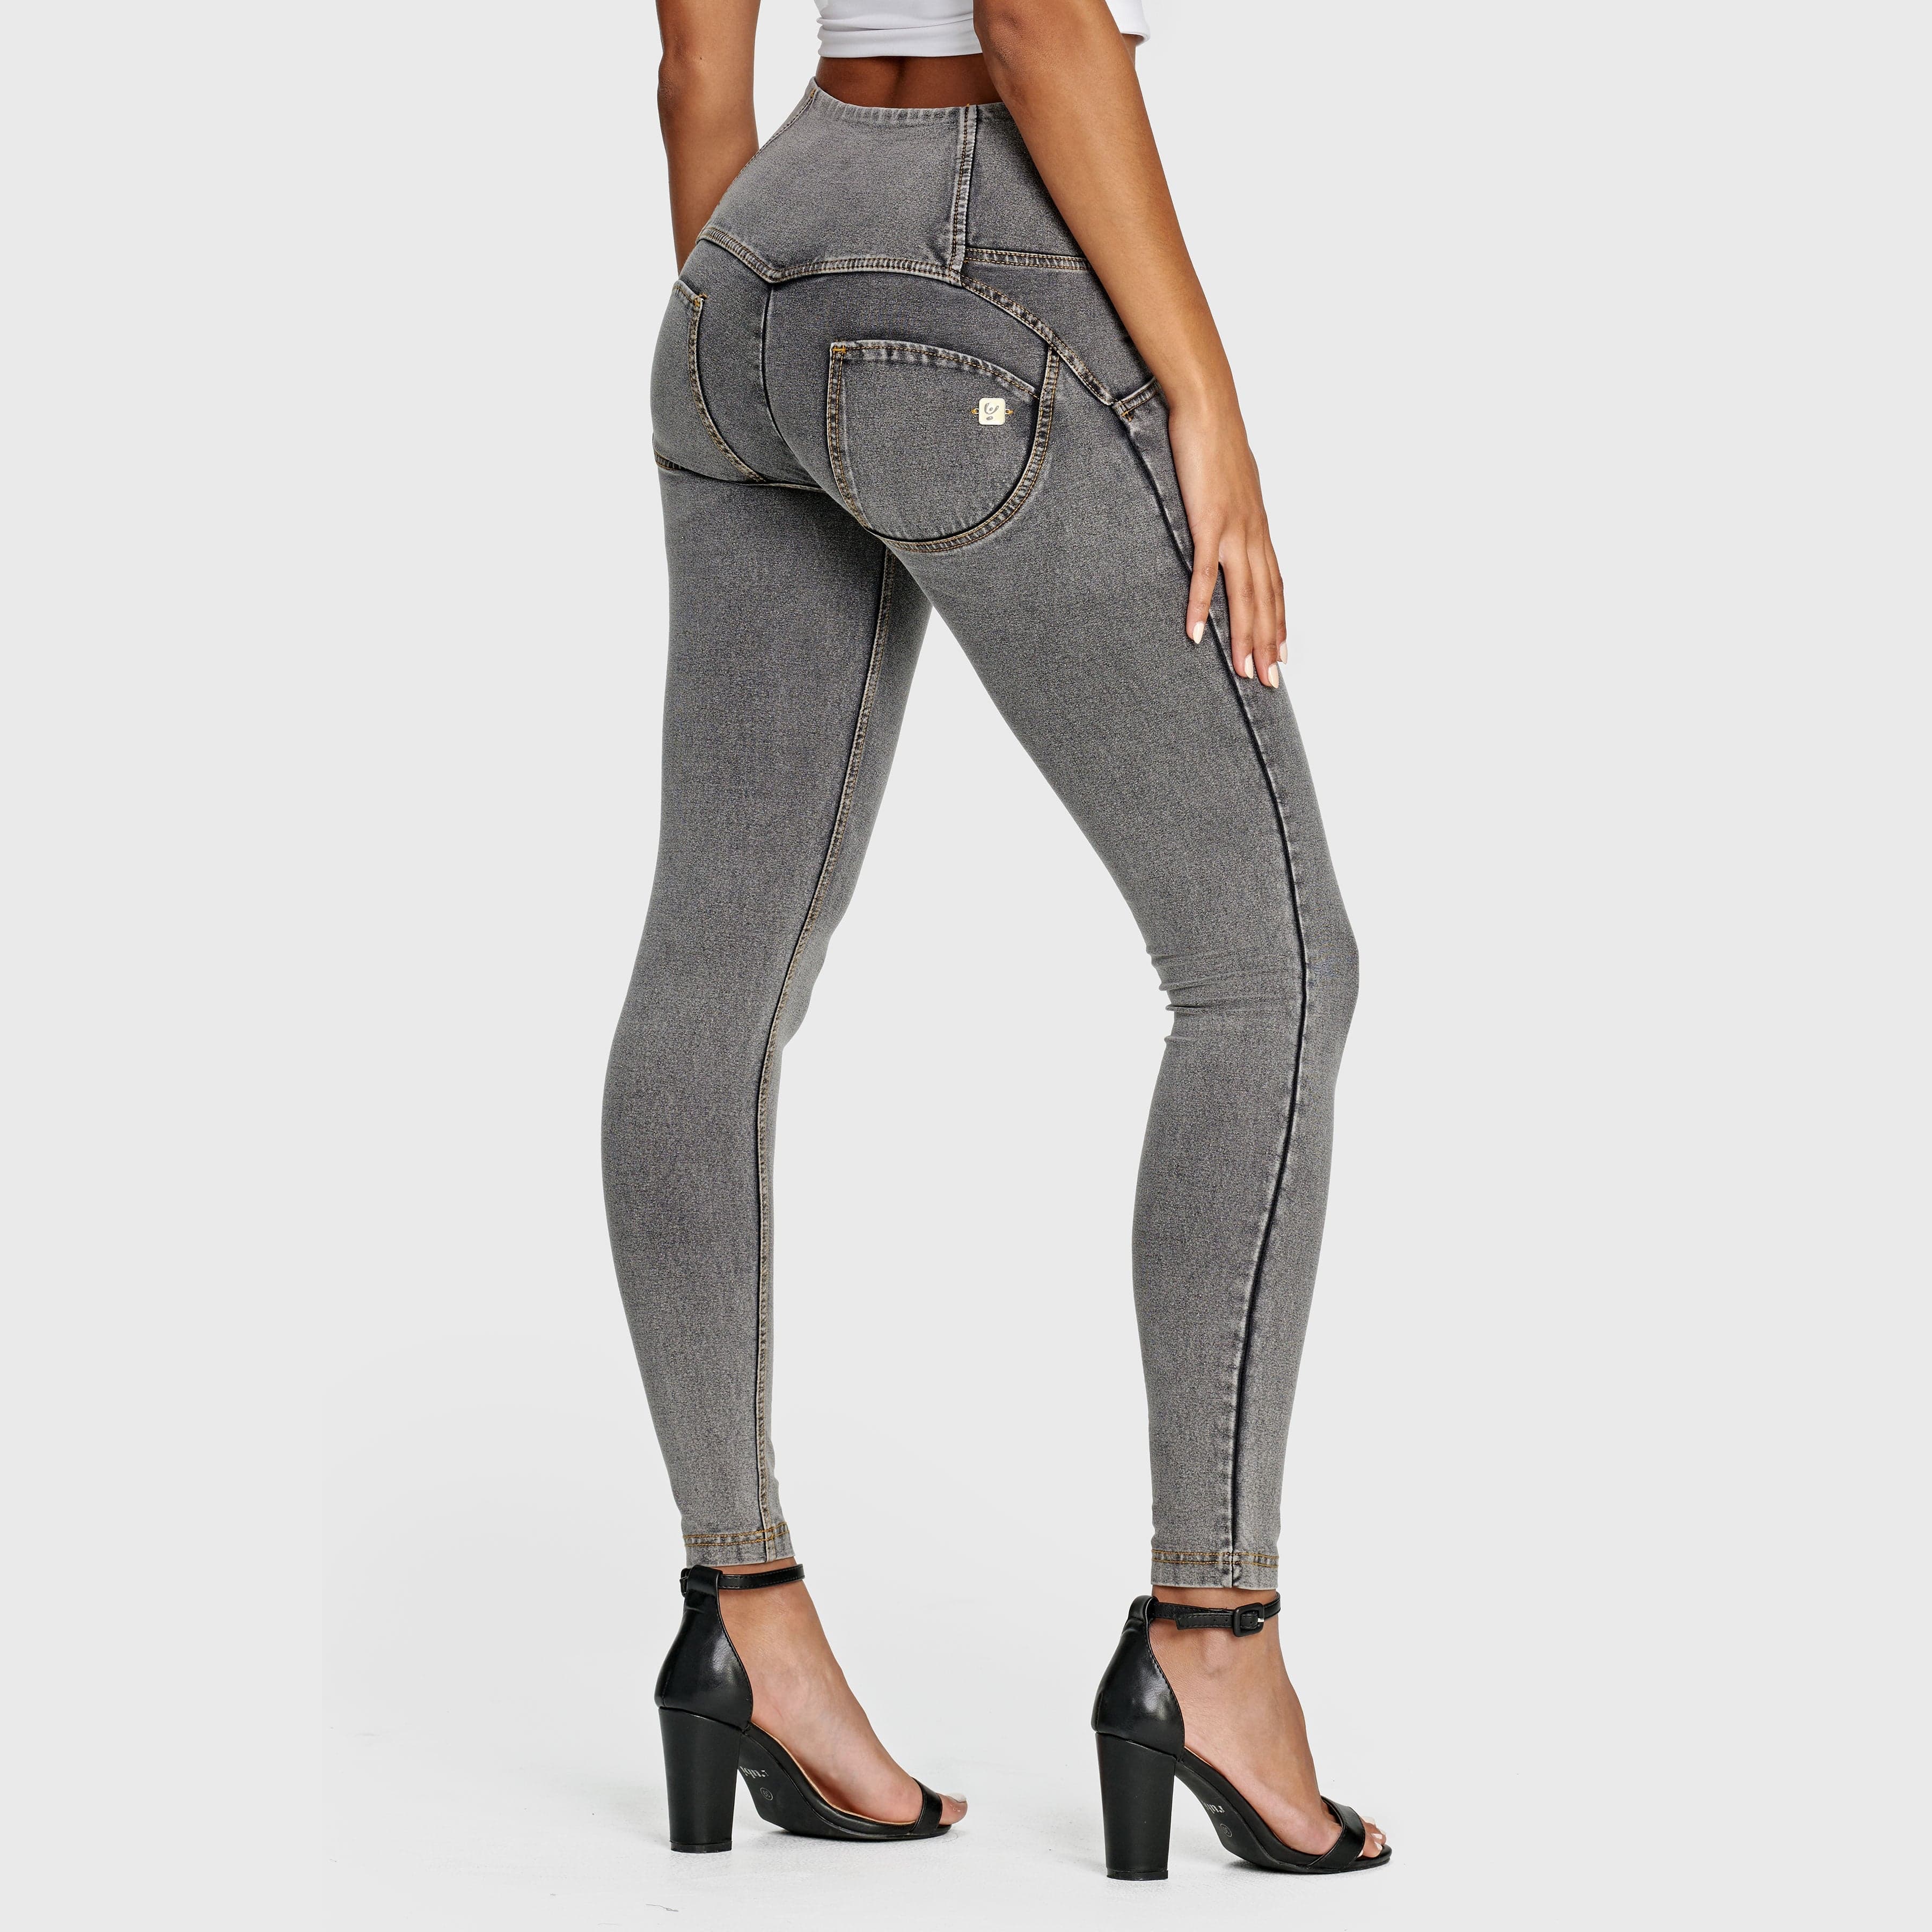 WR.UP® Denim - 3 Button High Waisted - Full Length - Grey + Yellow Stitching 3